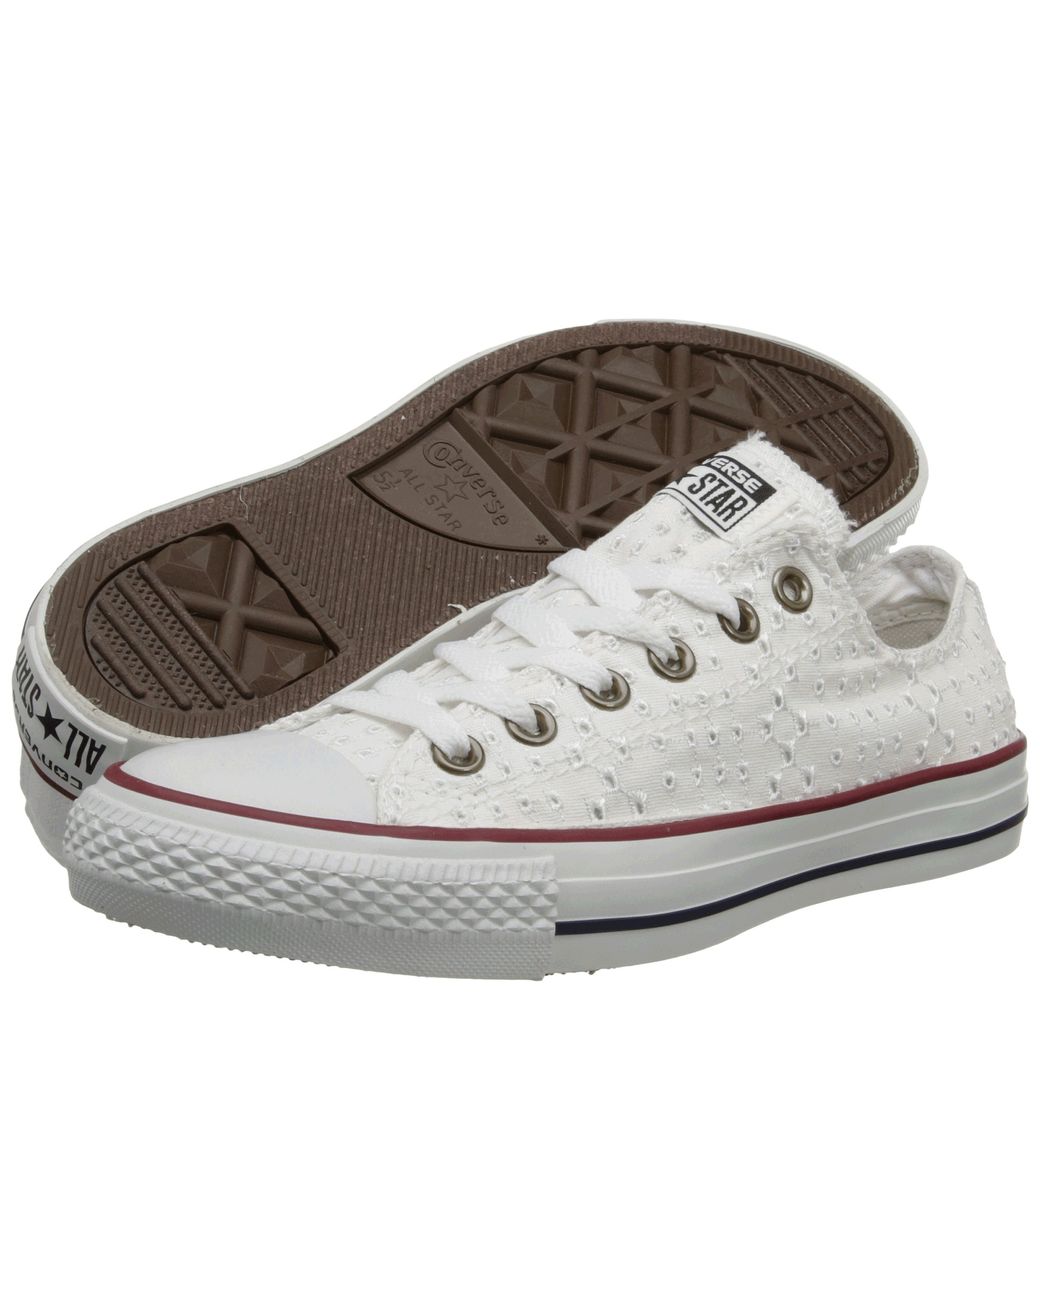 Converse Chuck Taylor All Star Eyelet Cutout Ox in White | Lyst